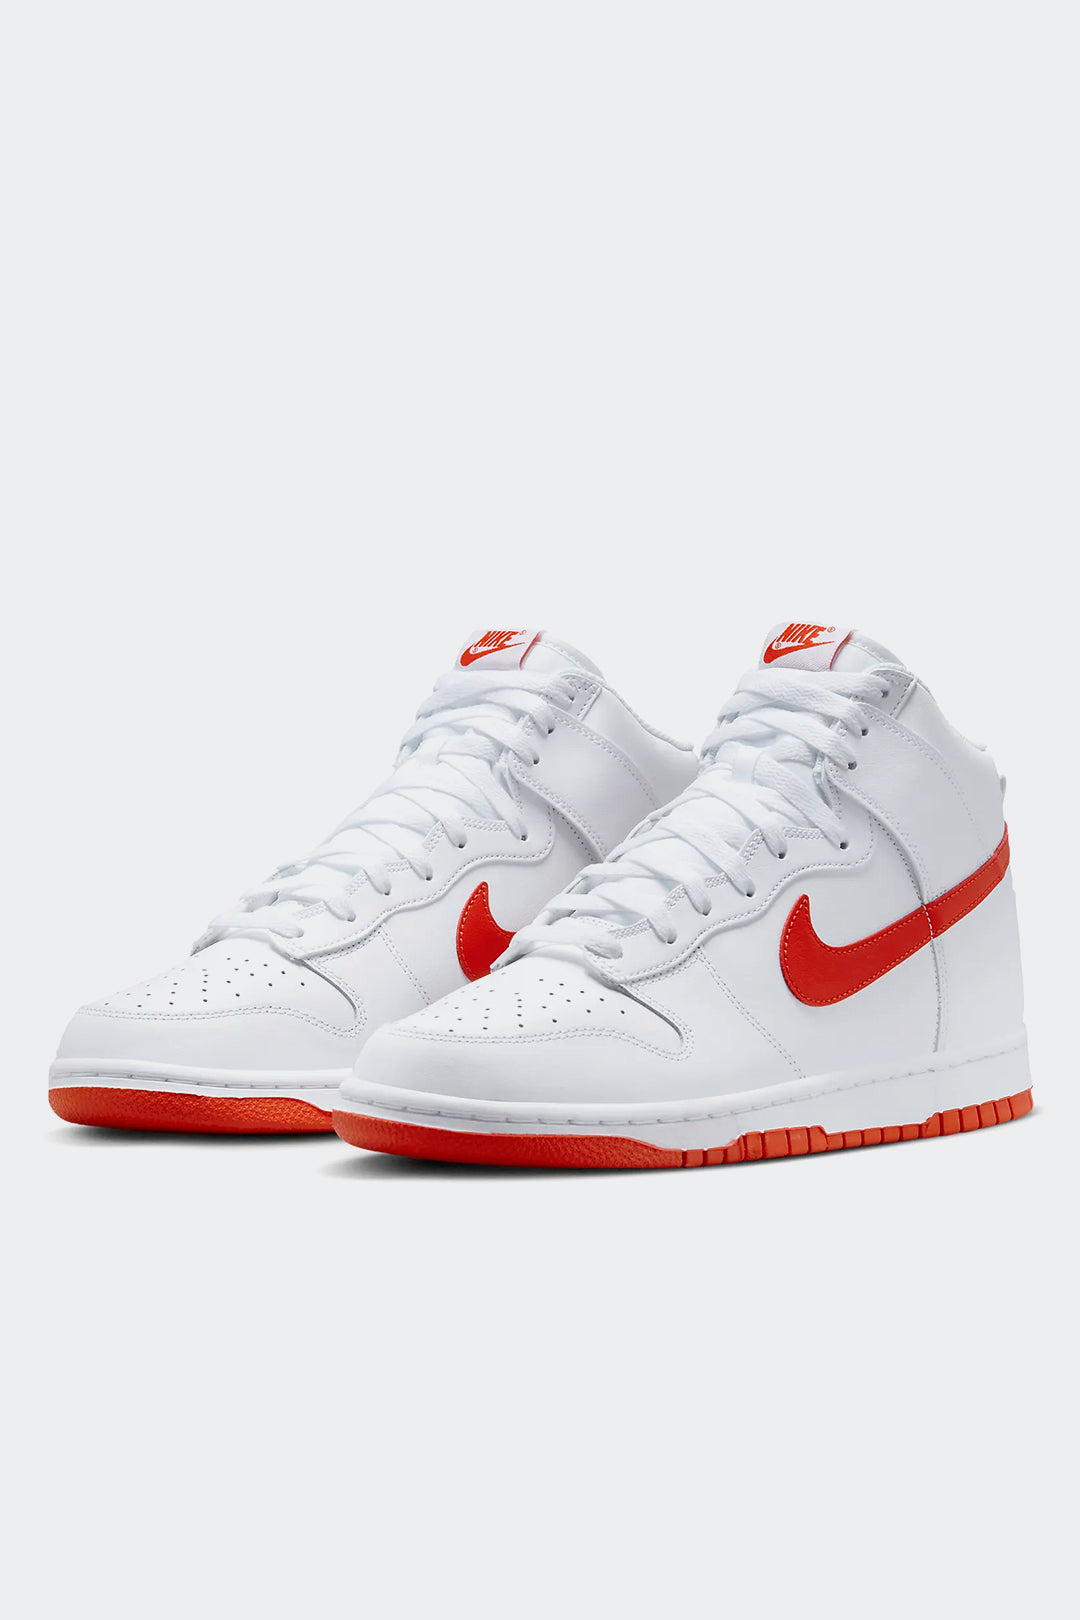 NIKE DUNK HIGH RETRO WHITE "PICANTE RED" - HYPE